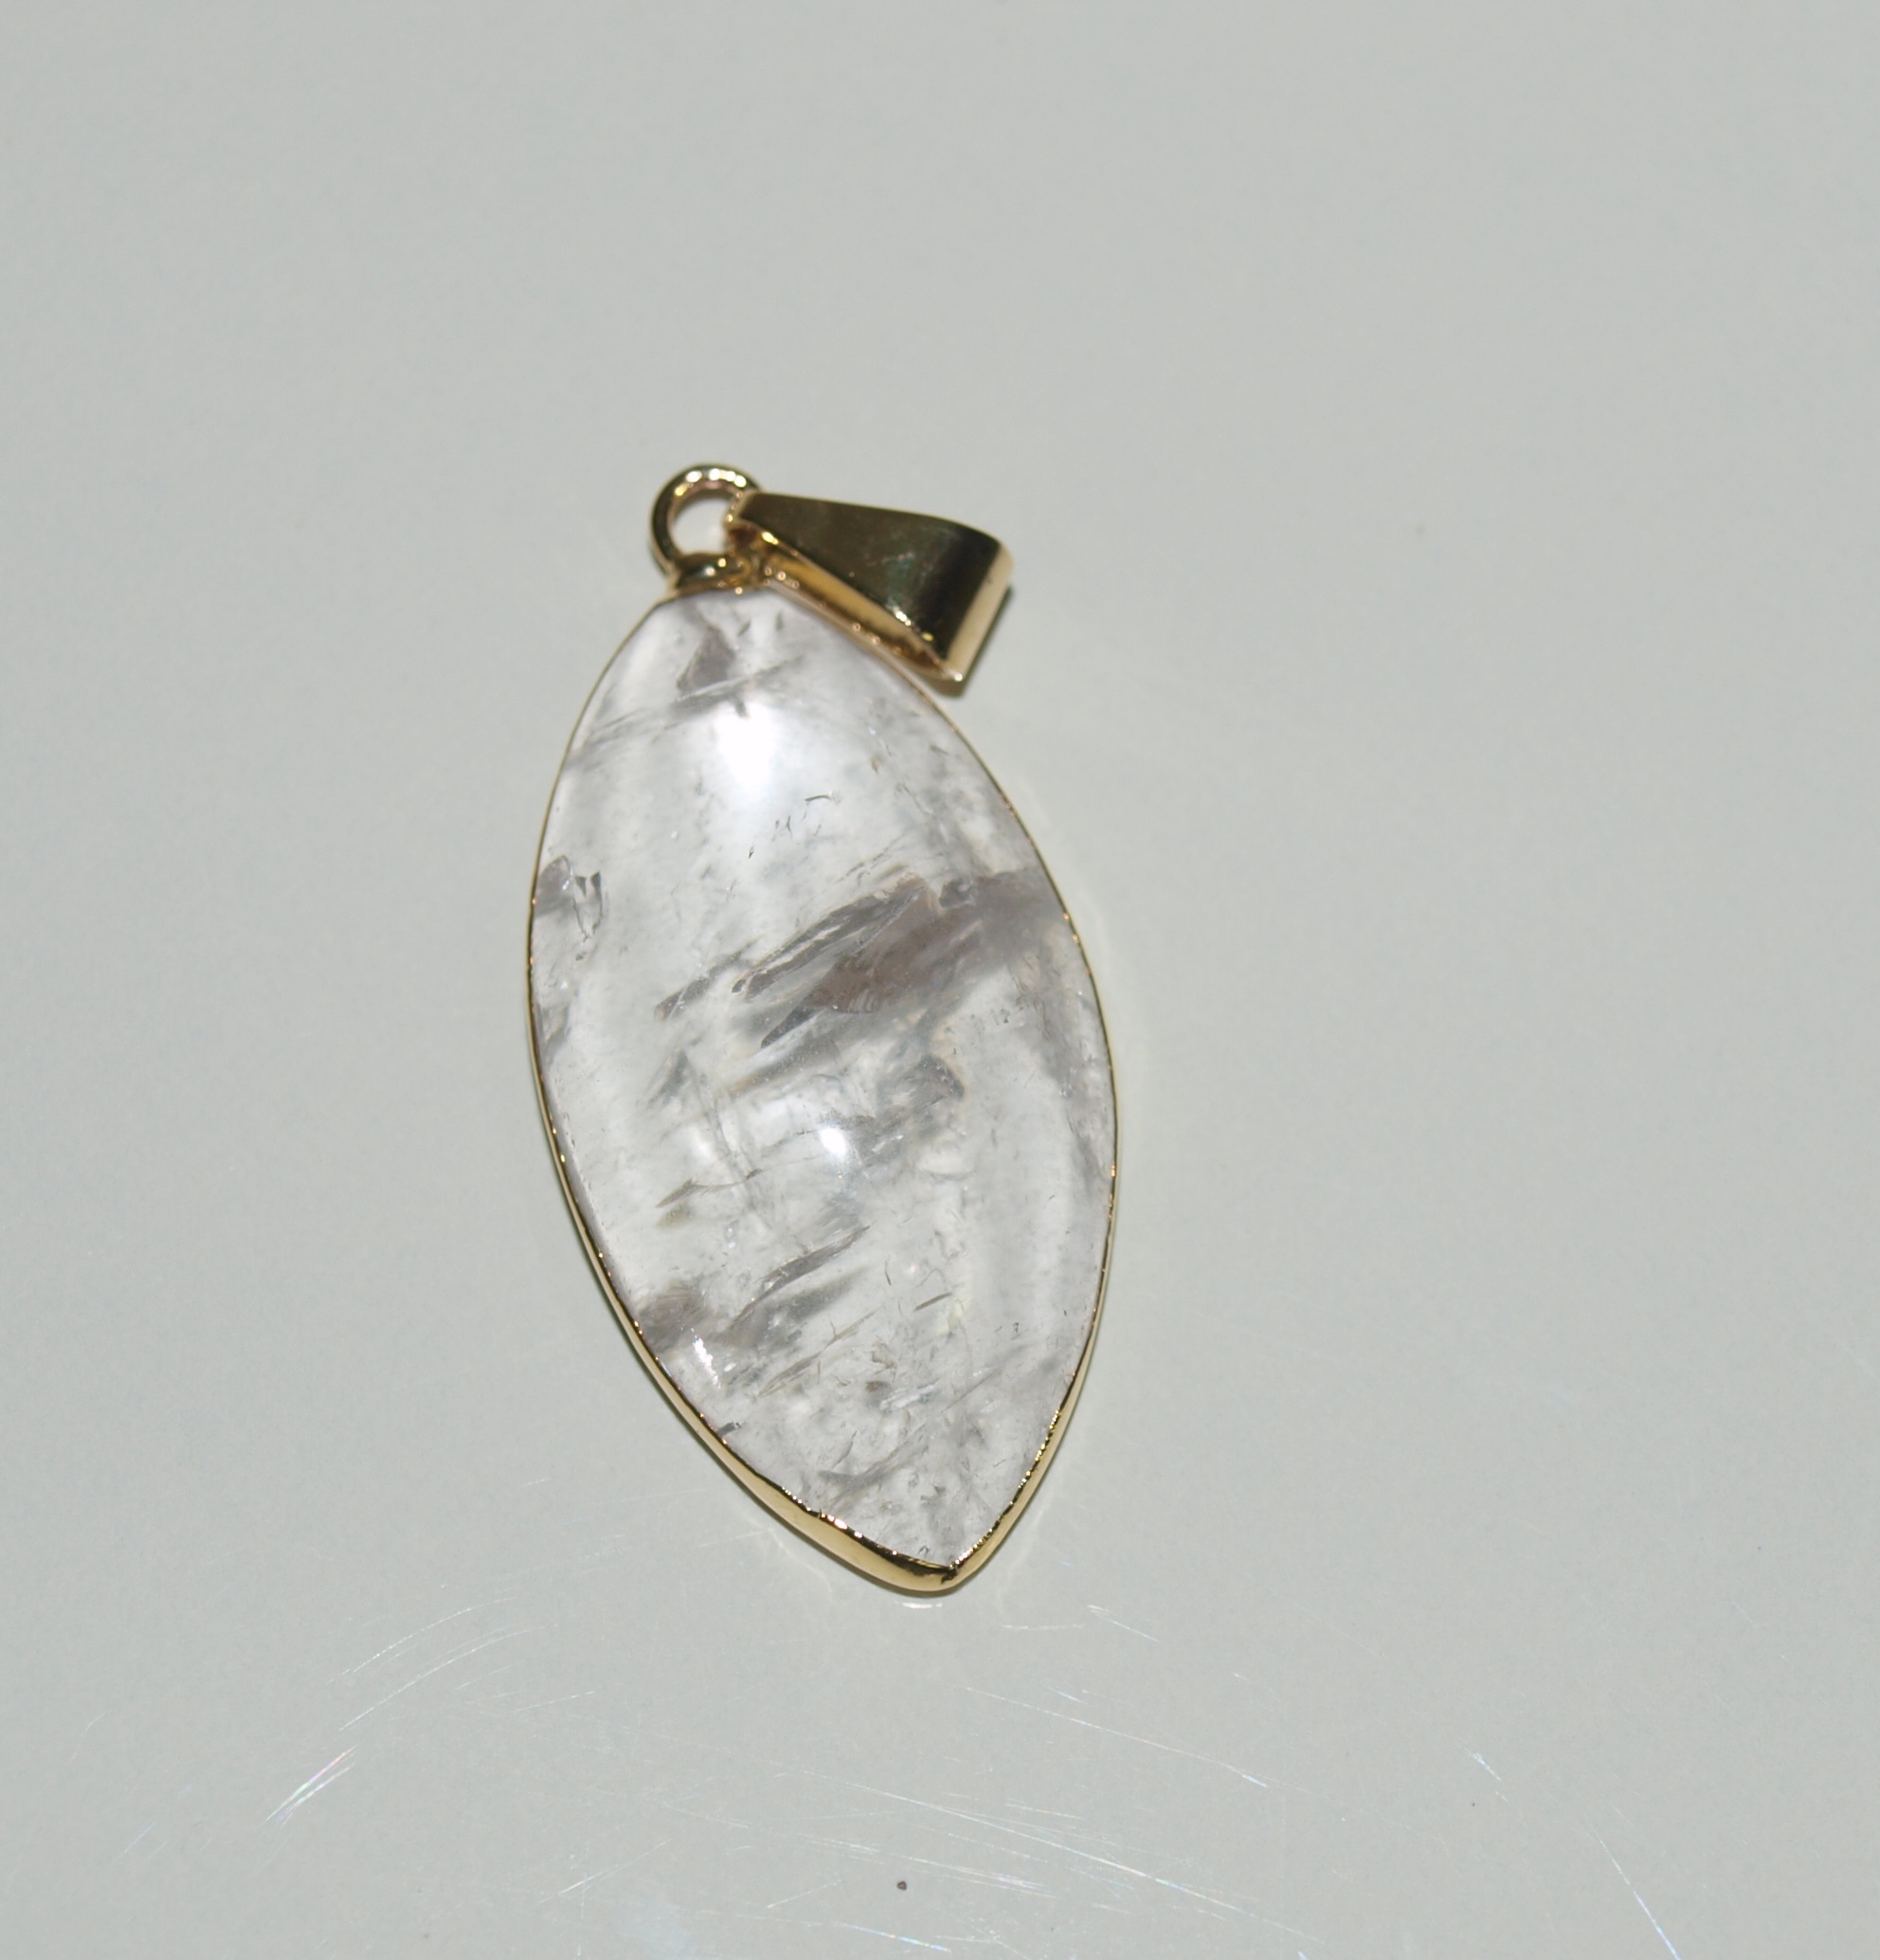 Stones from Uruguay - Clar Quartz Marquise Cabochon Pendant, 30x15mm. Gold Plated 